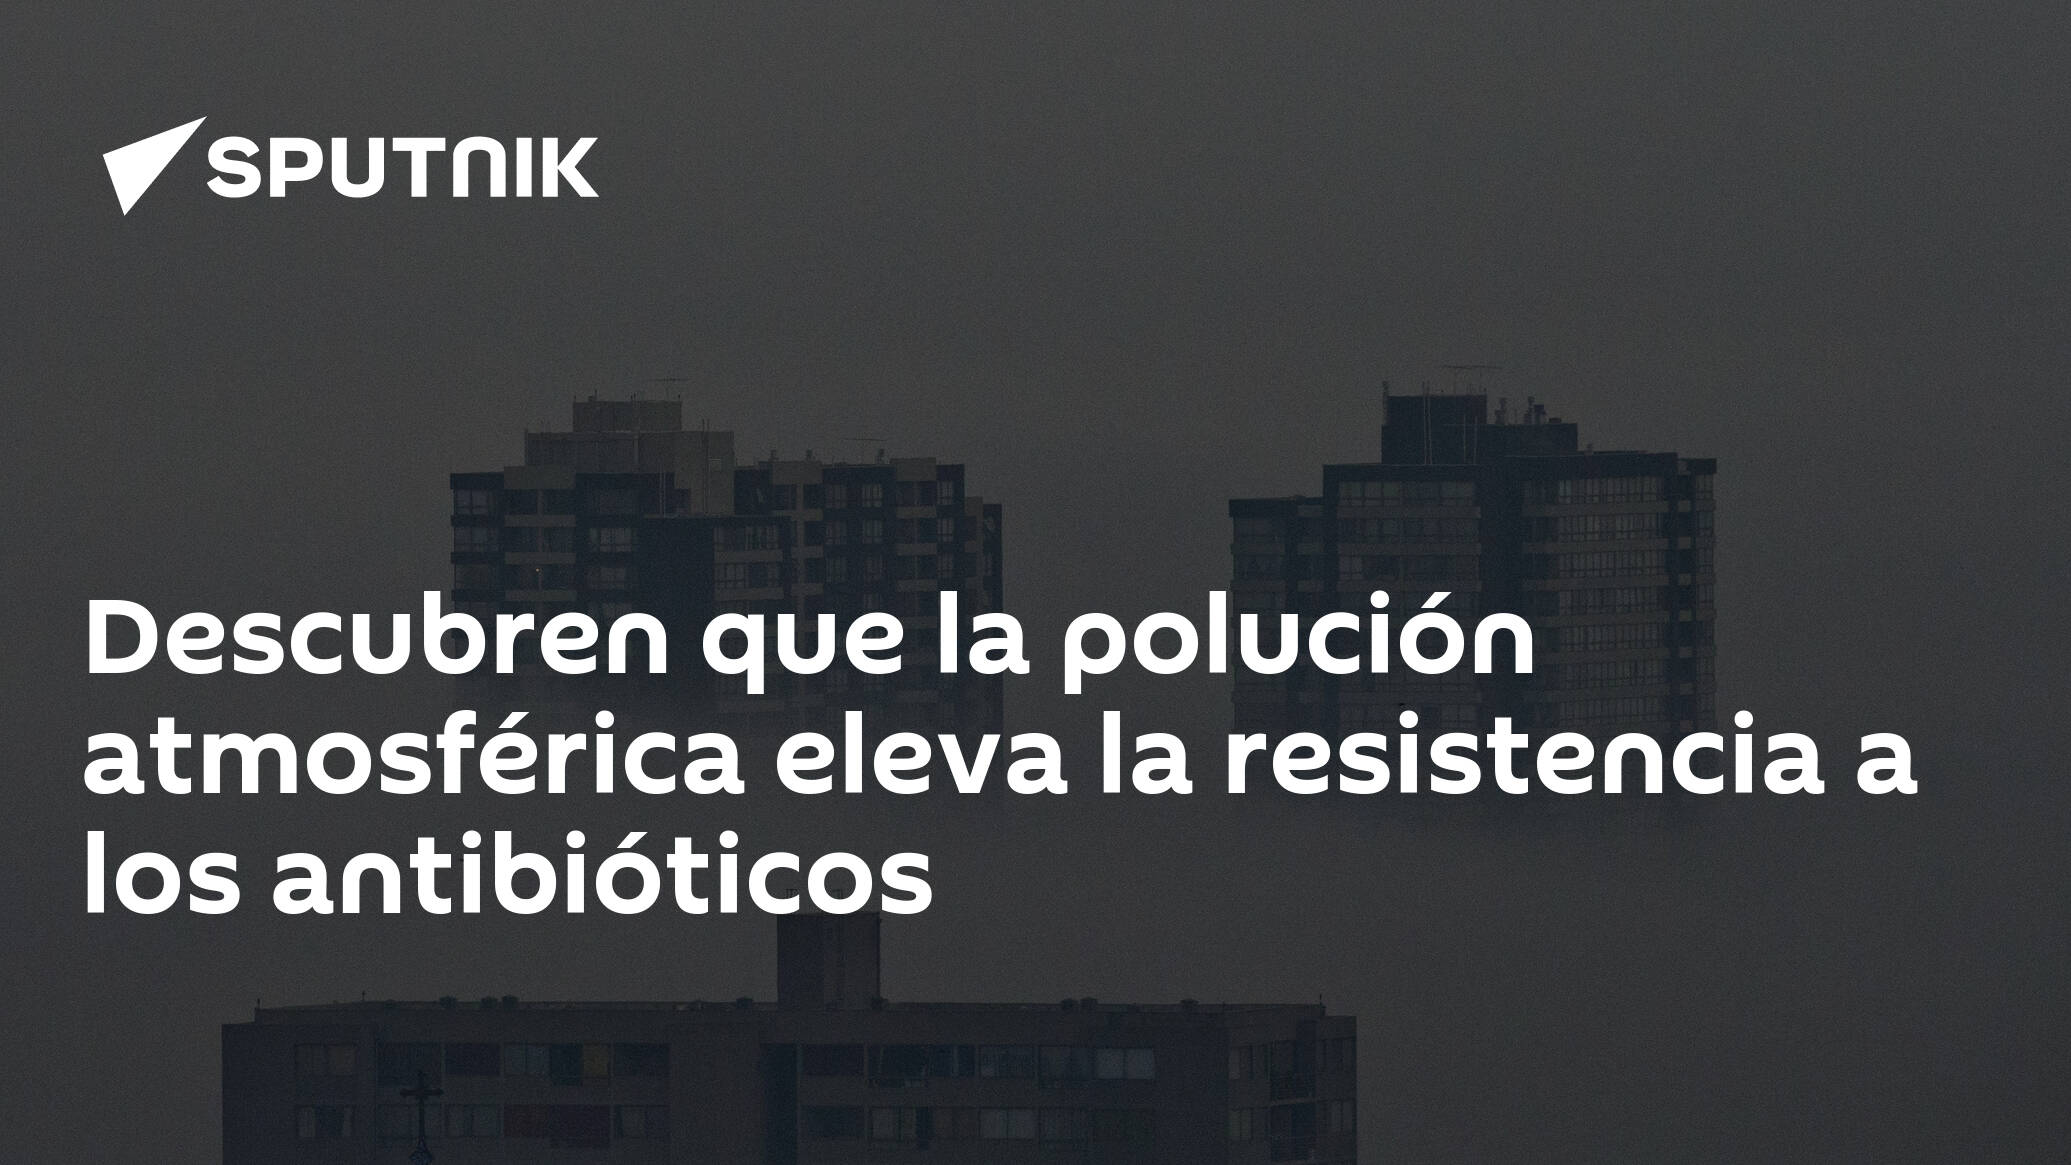 Air pollution increases resistance to antibiotics, they find